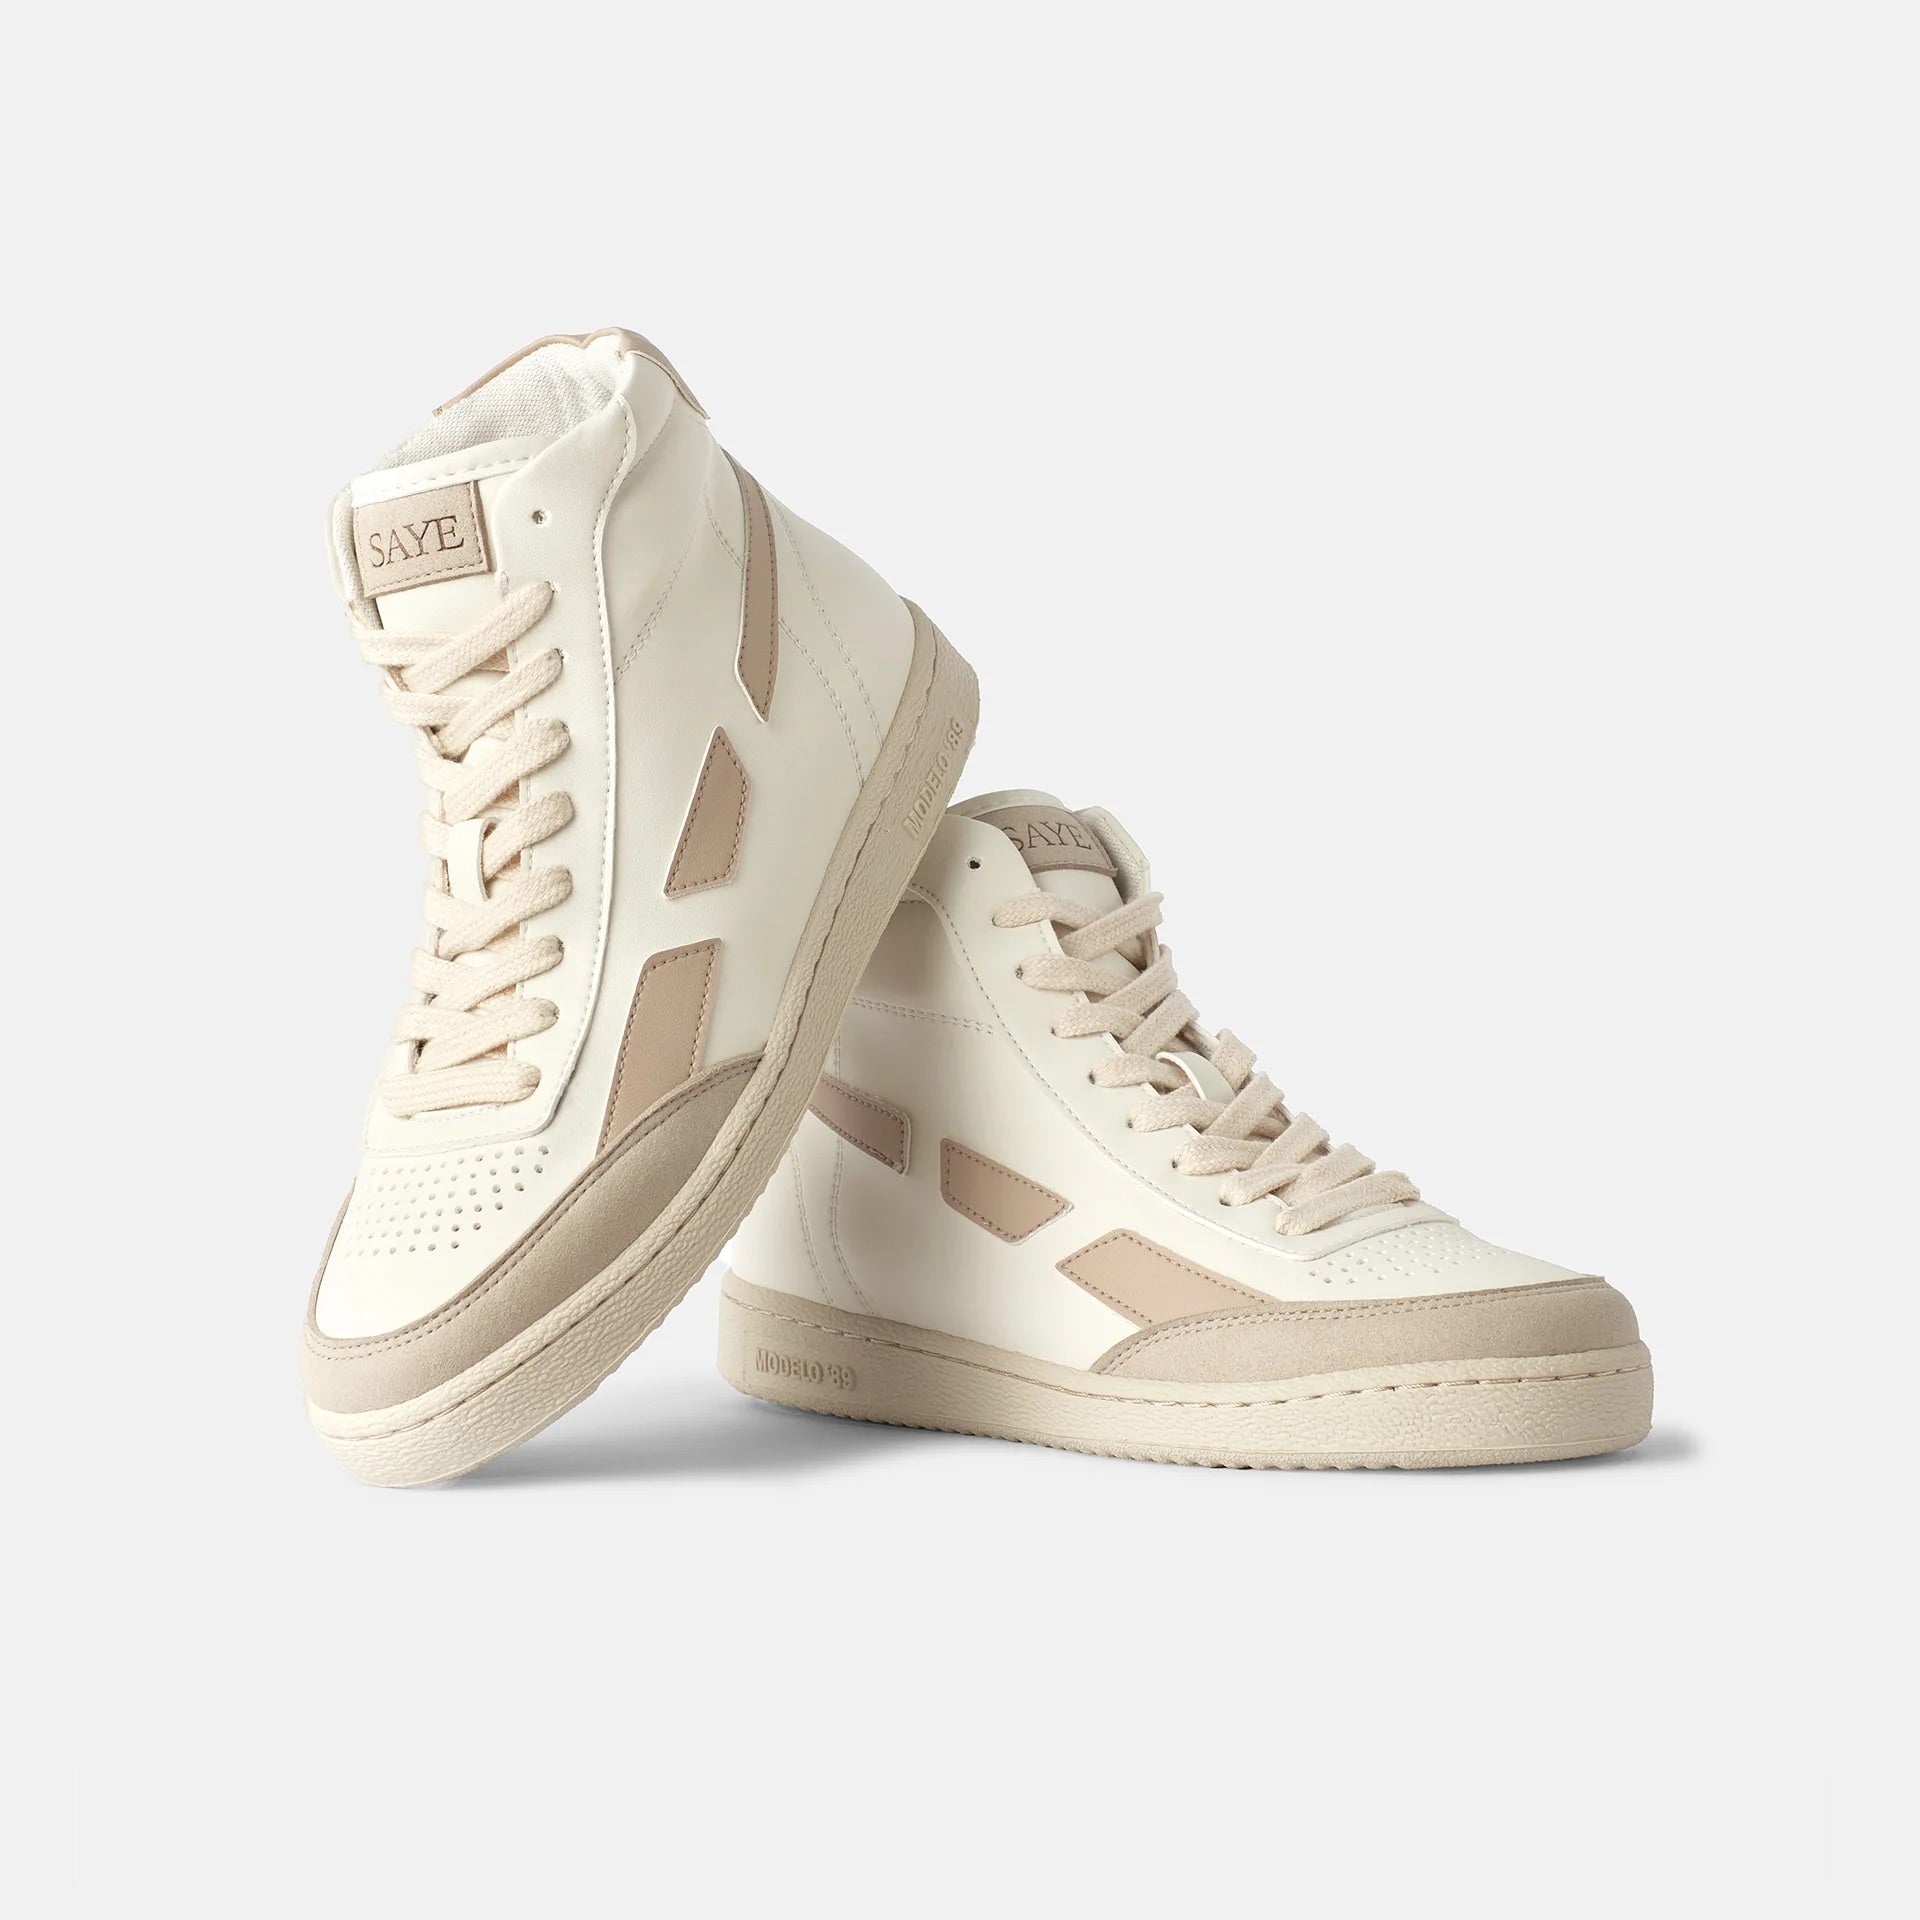 A pair of high top Modelo '89 Hi sneakers in beige and tan, featuring bamboo lining and bio-based vegan leather. Brand name: SAYE.